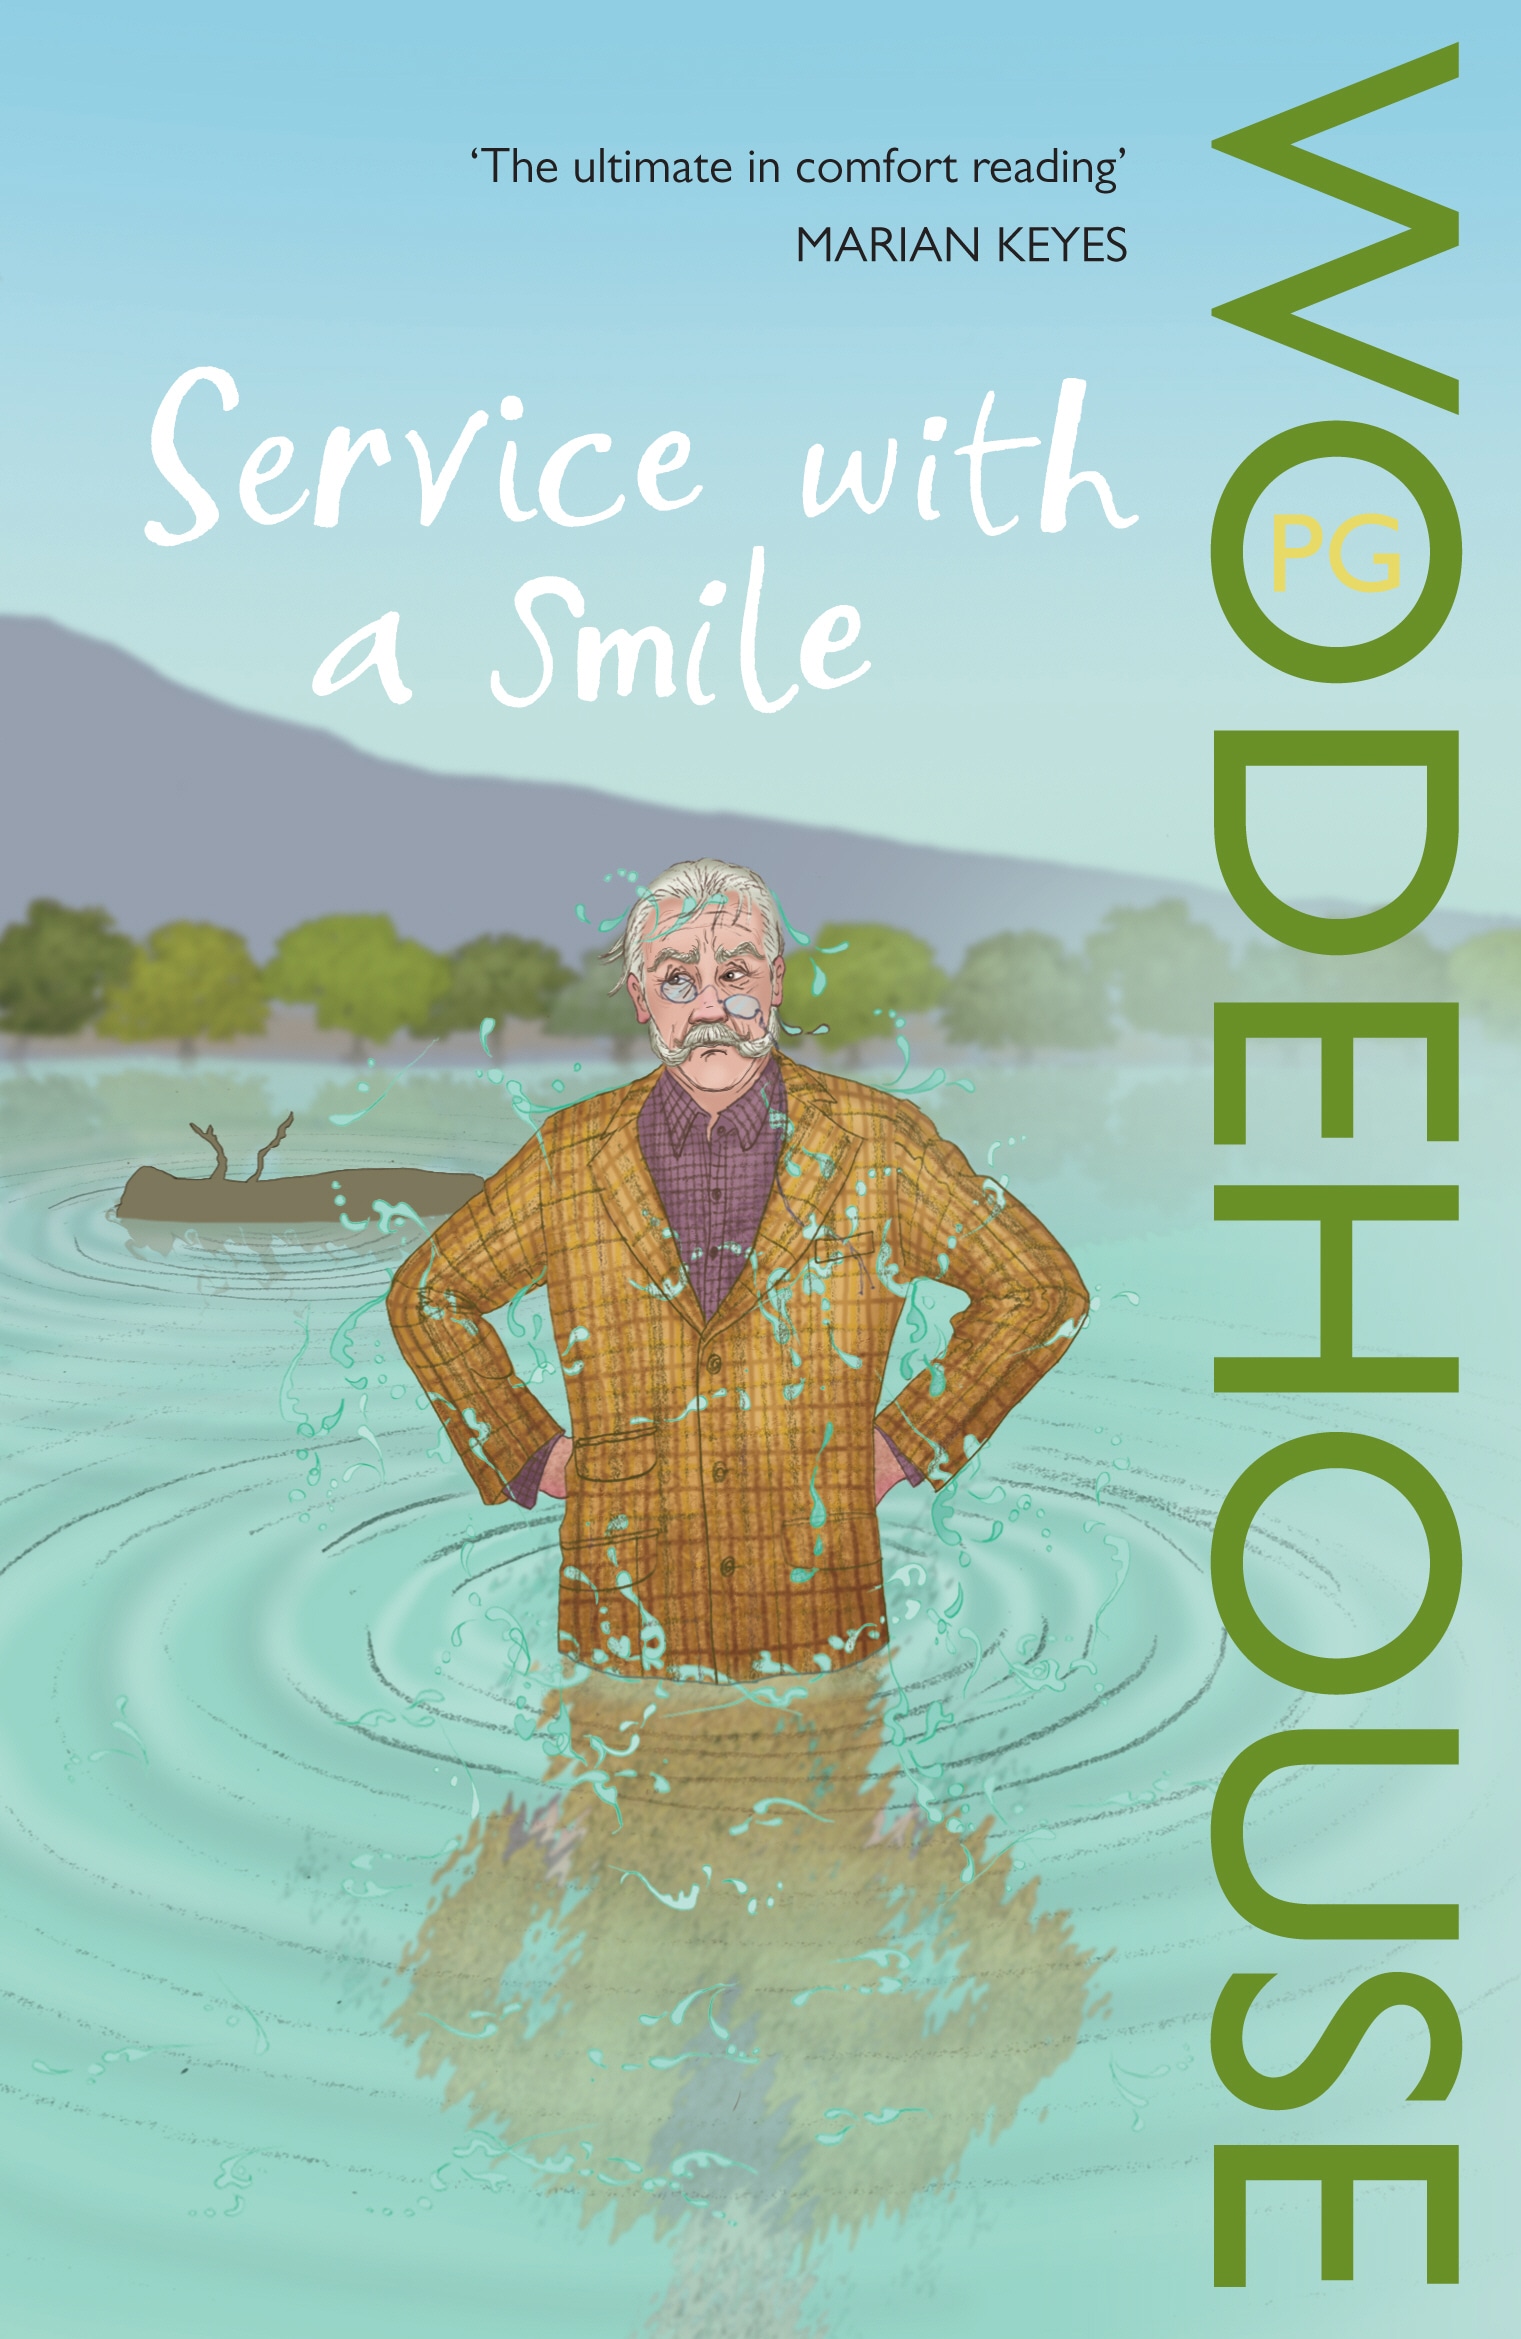 Book “Service with a Smile” by P.G. Wodehouse — August 7, 2008